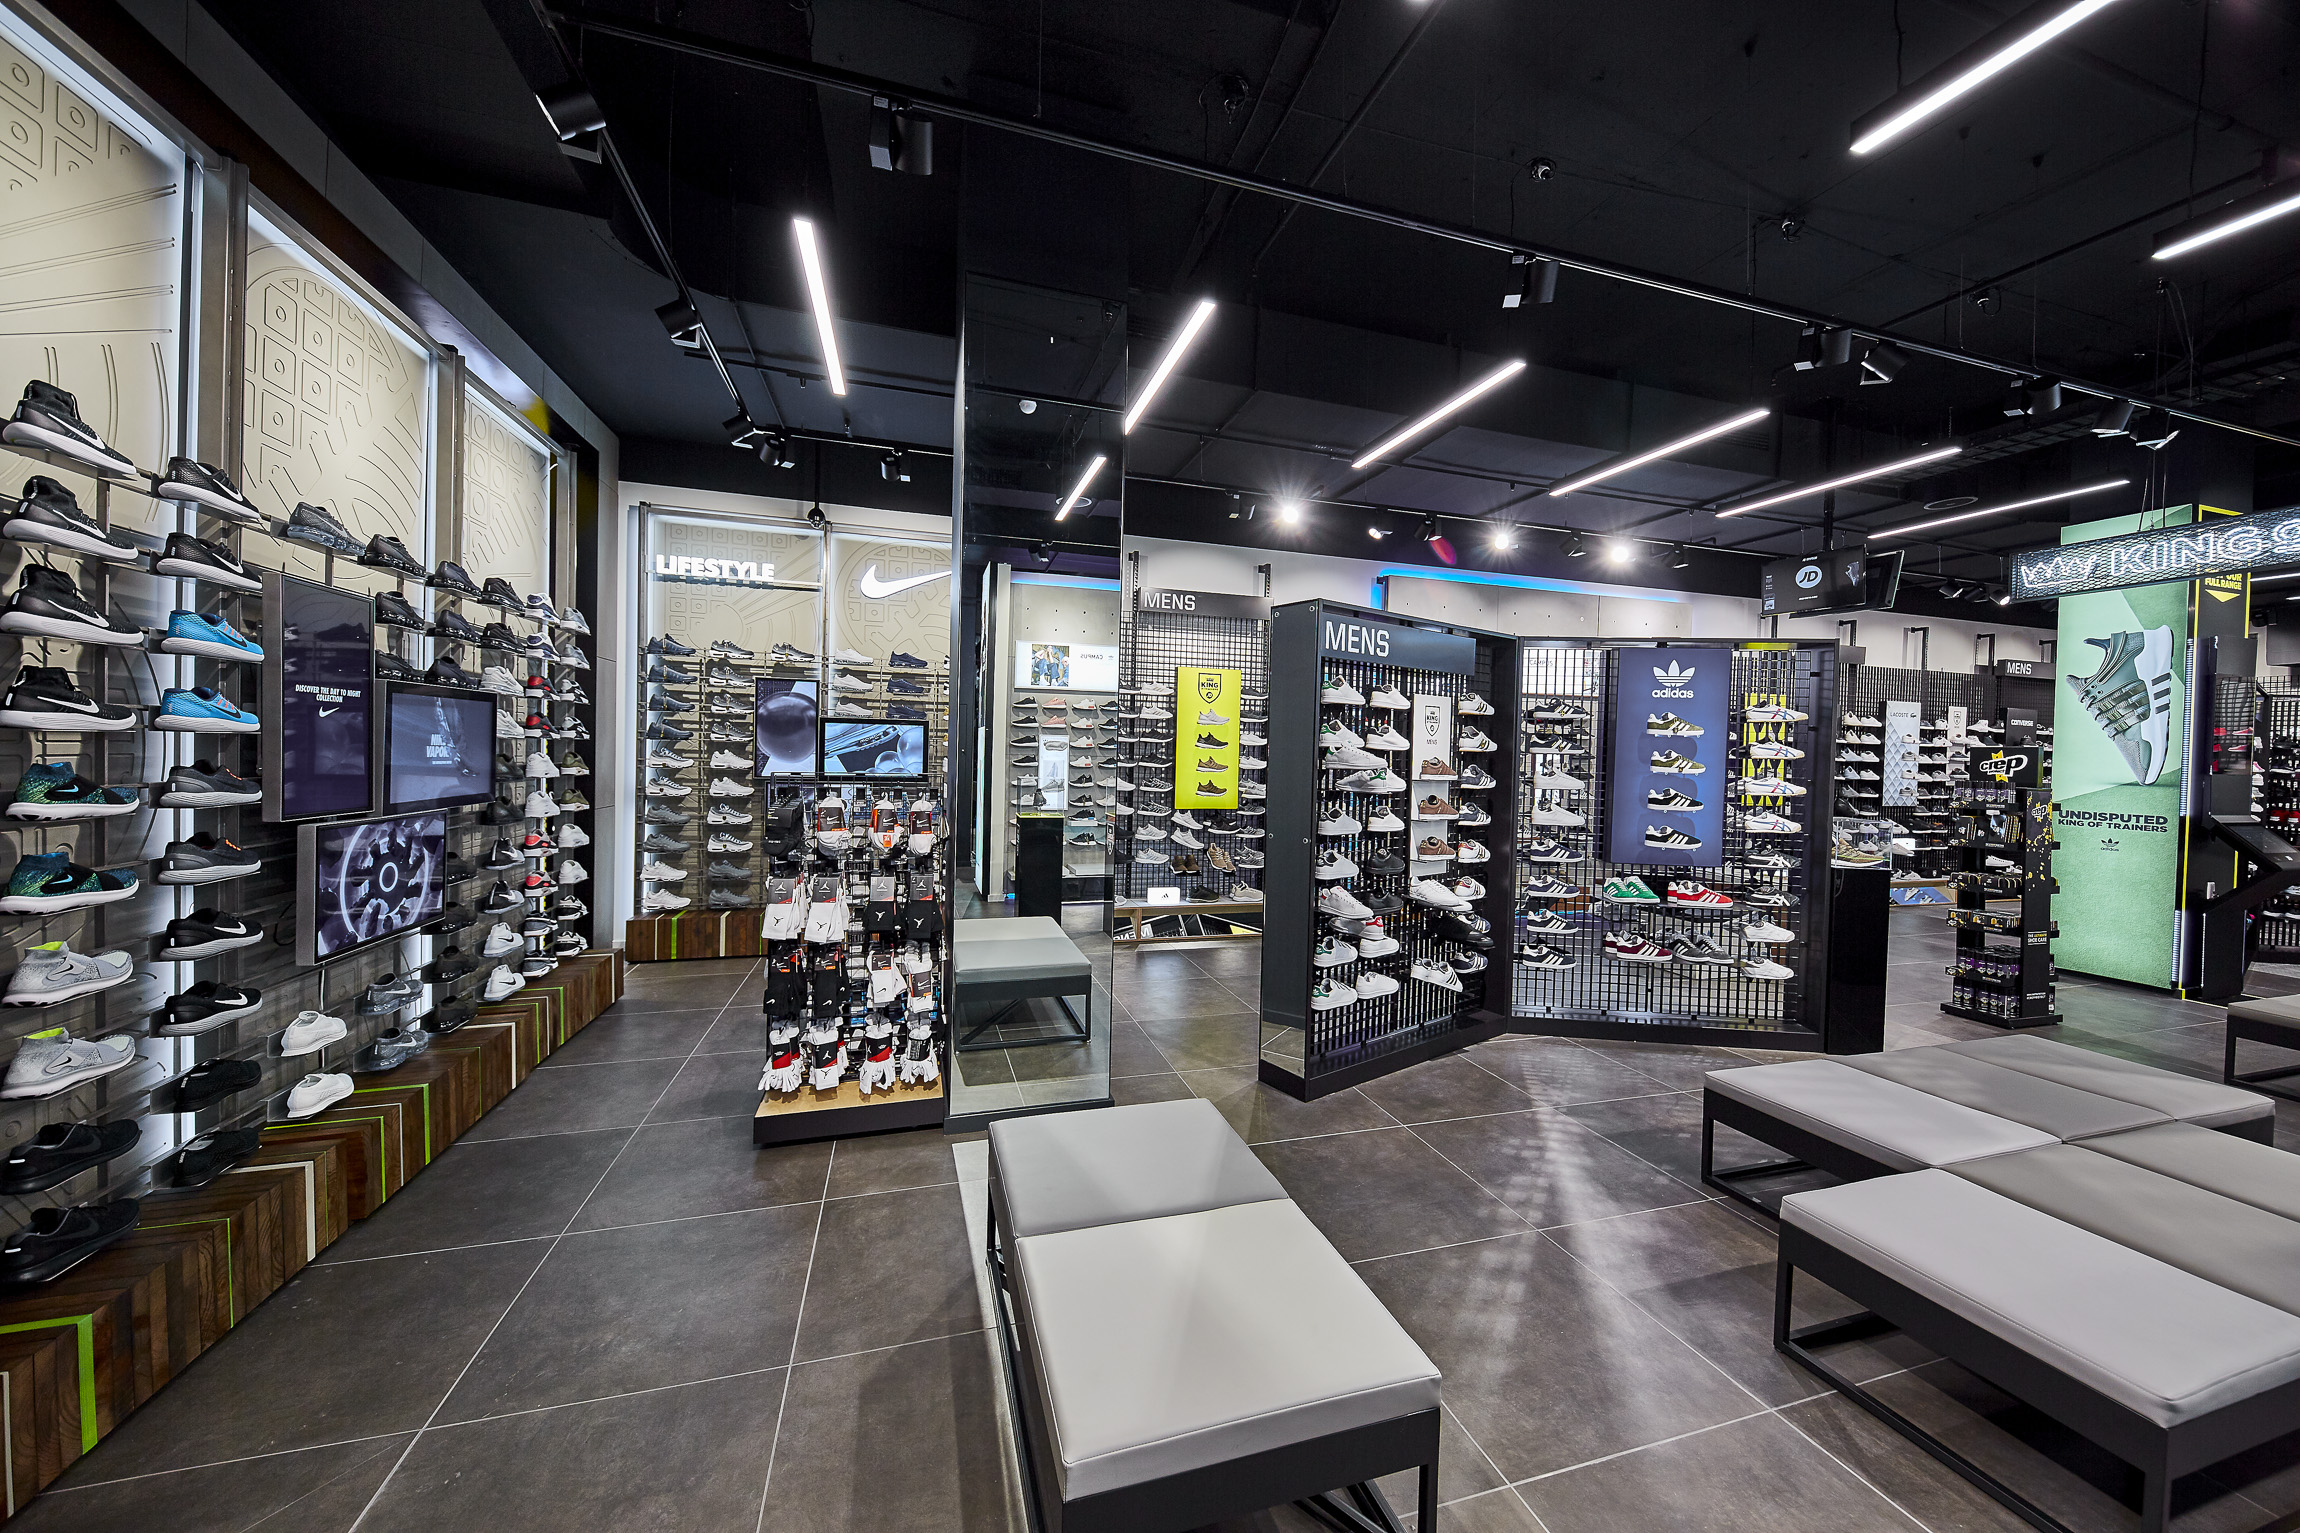 Westfield Bondi Junction welcomes new JD Sports store - Shopping